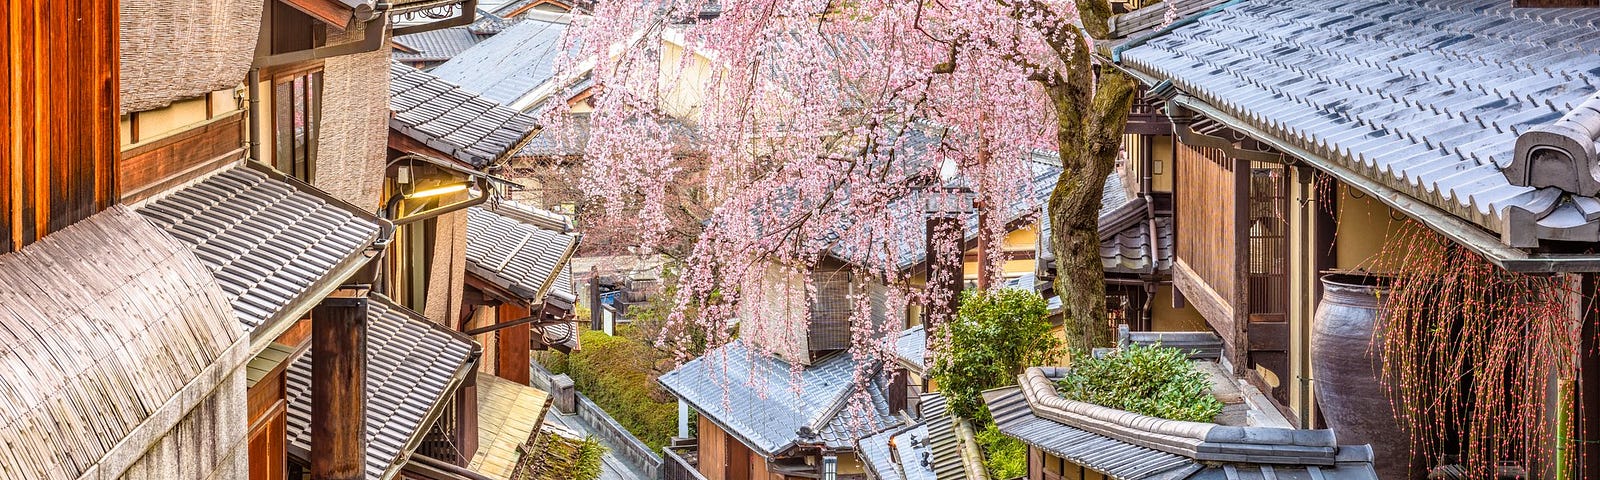 Cherry tree in bloom overhanging a narrow walkway sided by old wooden buildings.